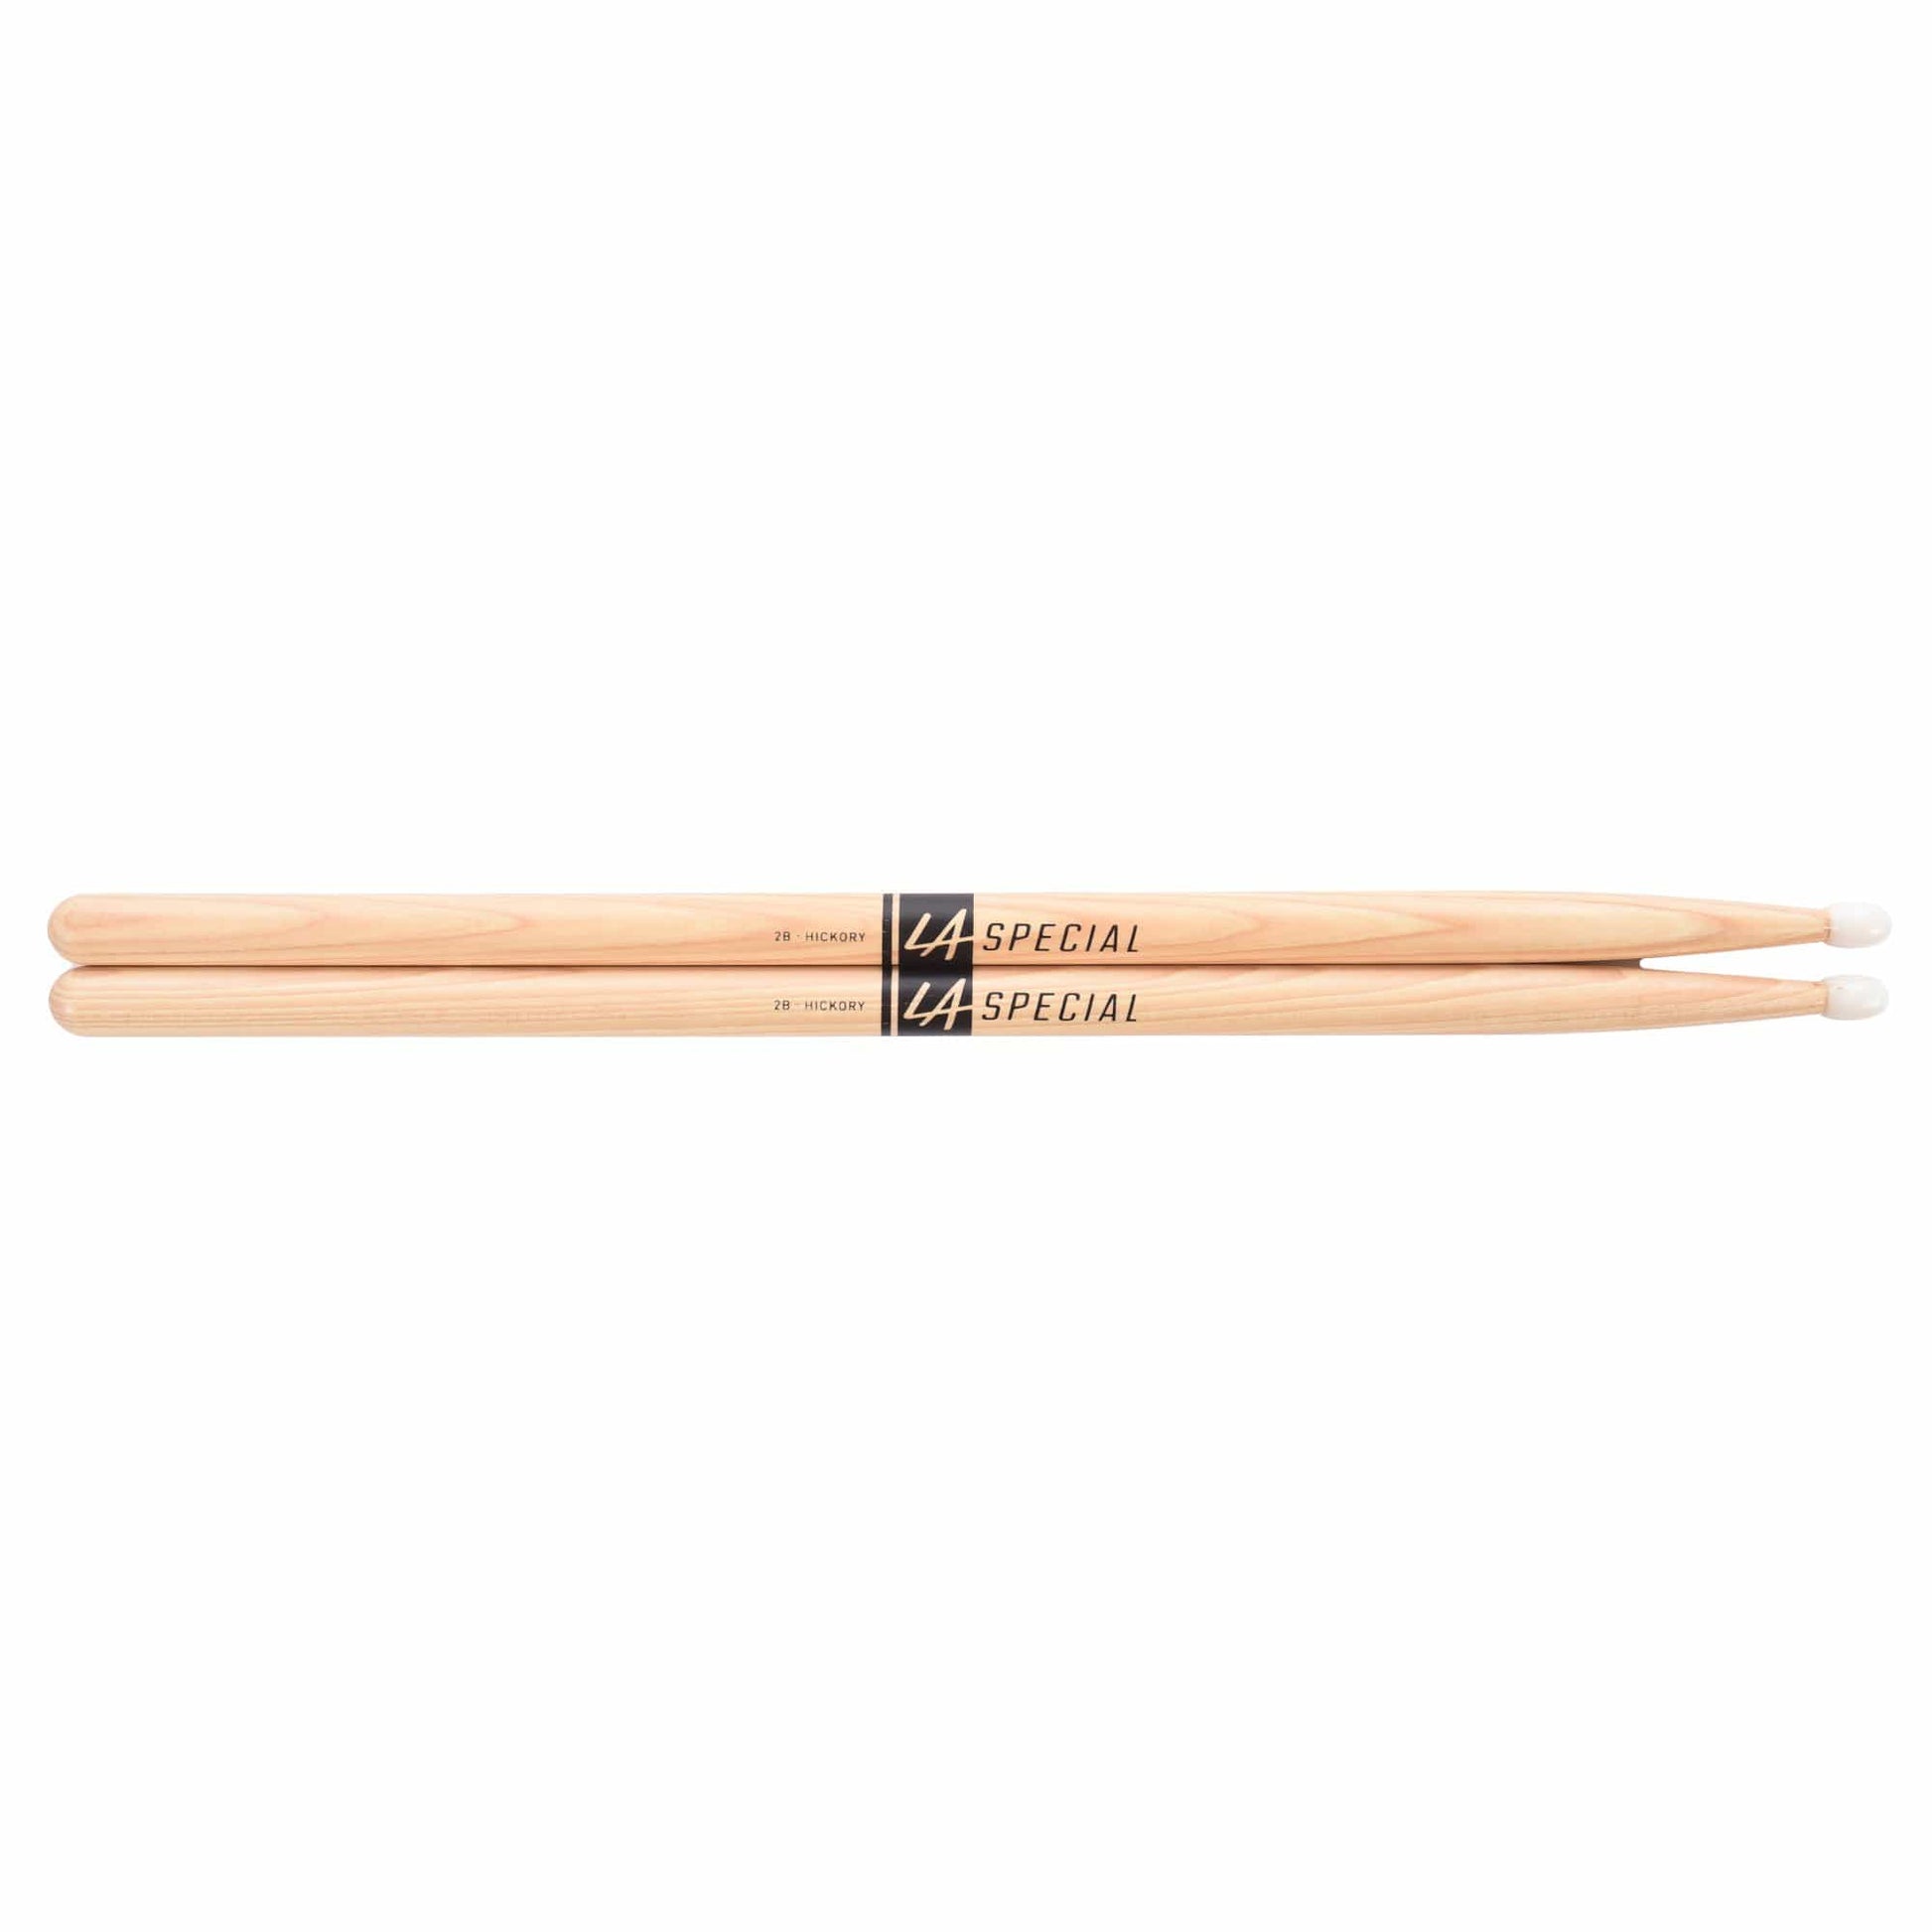 Promark LA Special 2B Nylon Tip Drumsticks Drums and Percussion / Parts and Accessories / Drum Sticks and Mallets